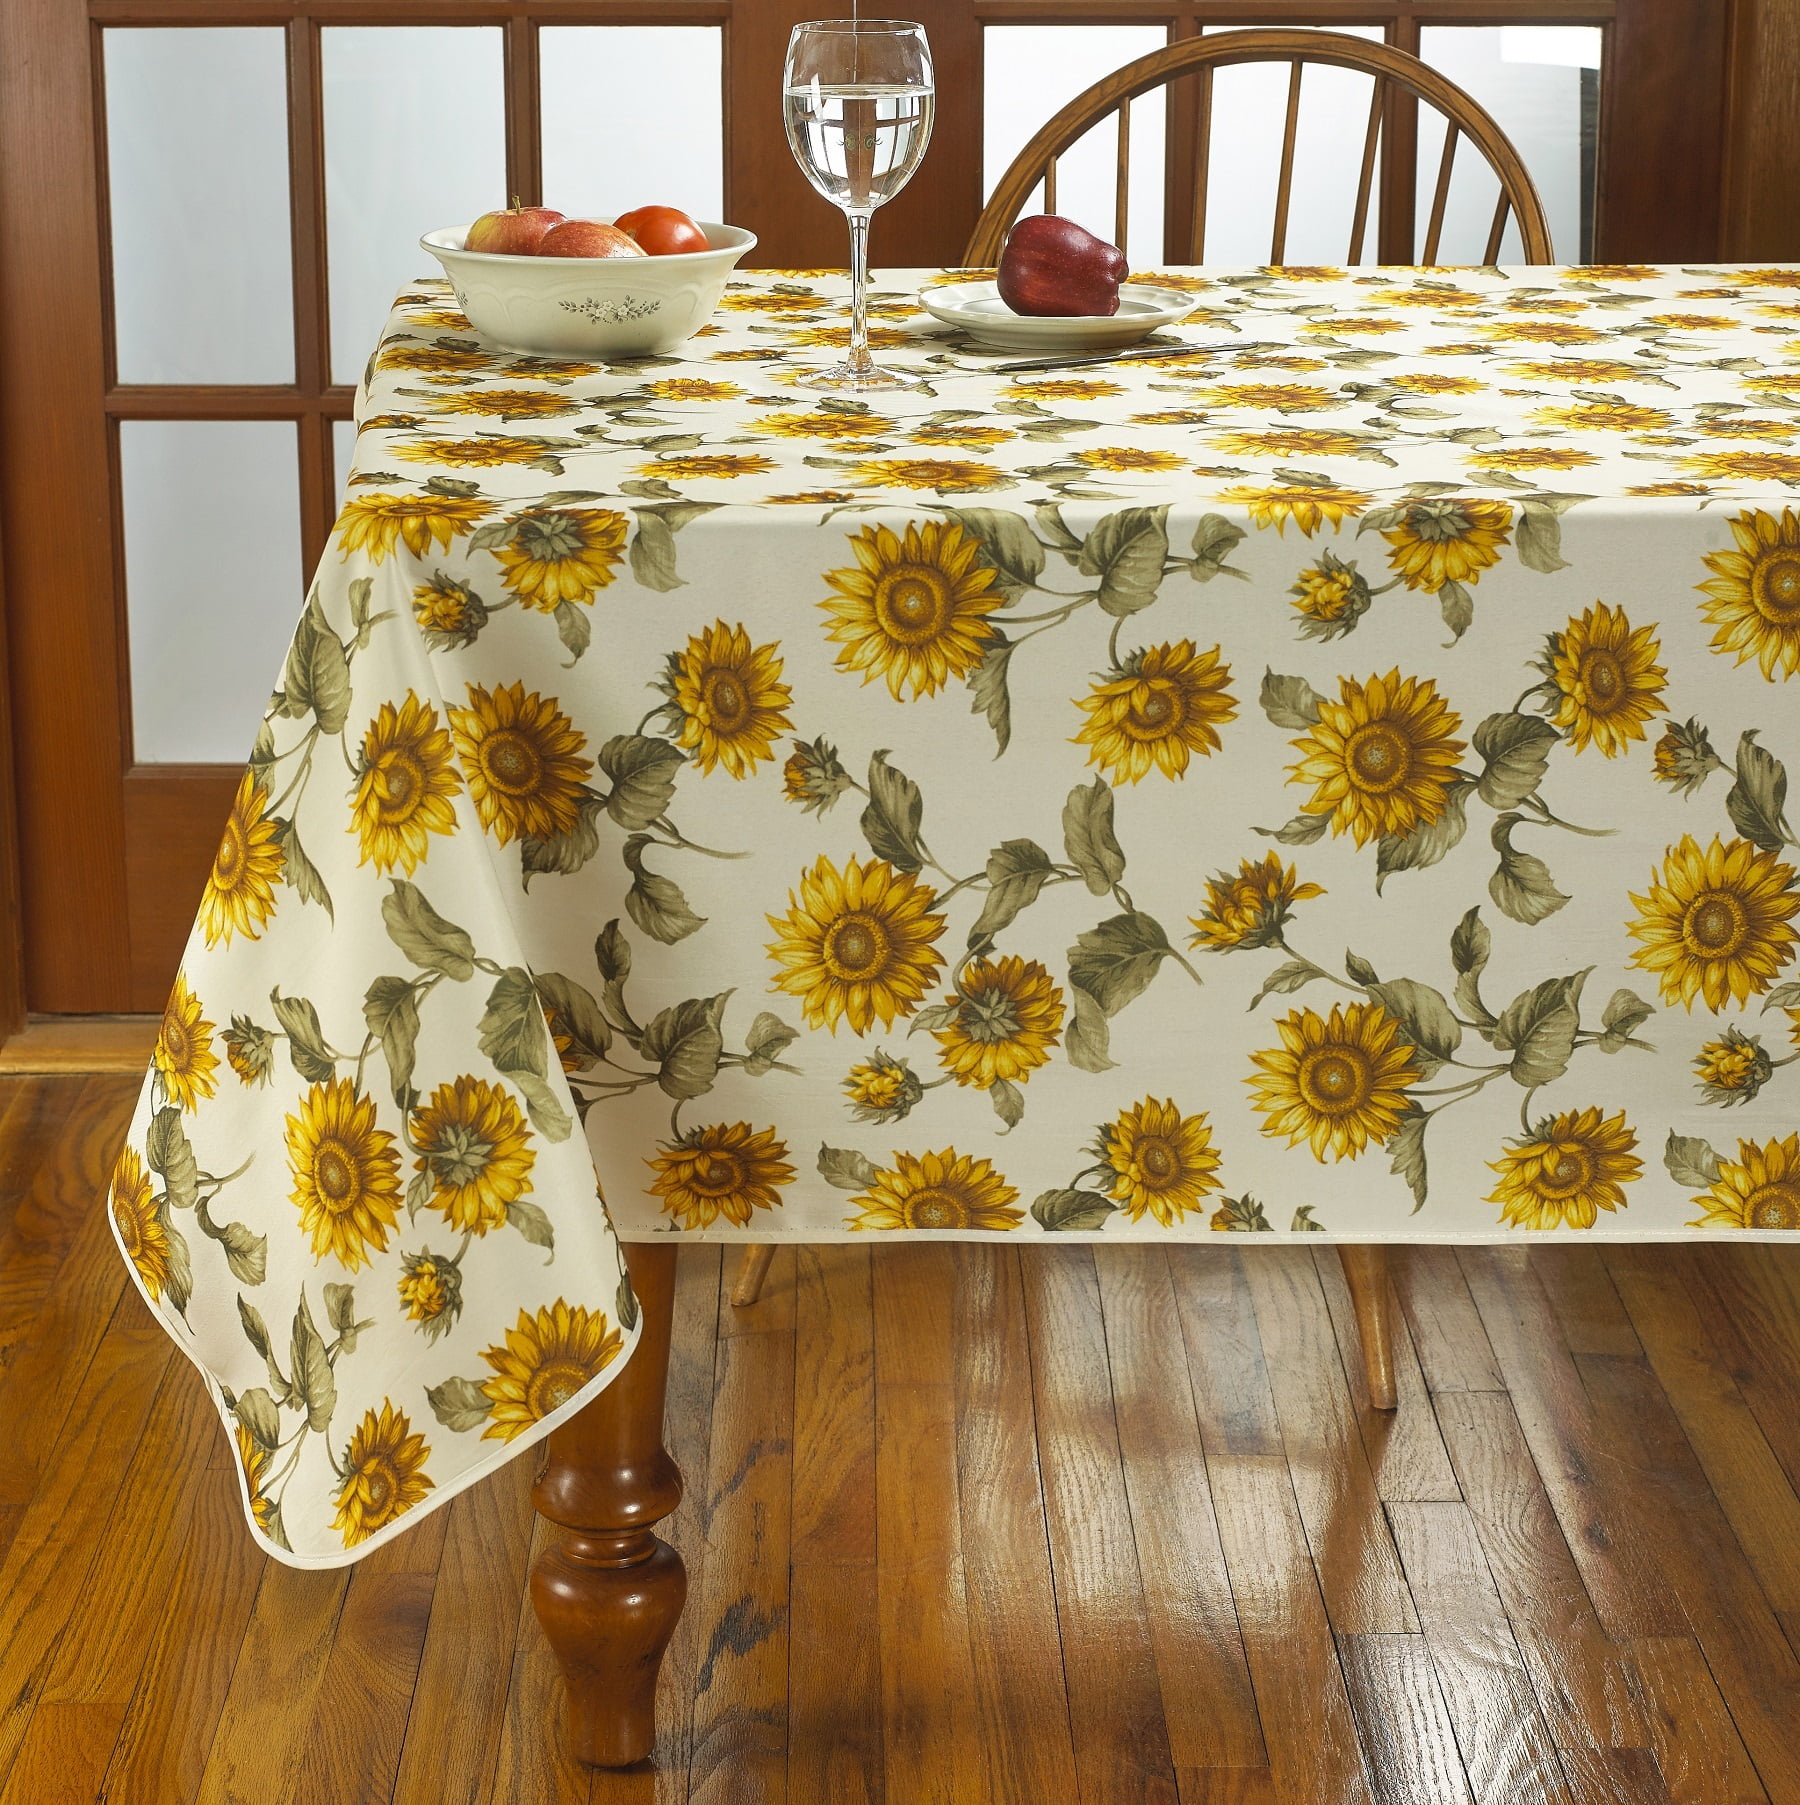 PVC TABLE CLOTH NATURAL SUNFLOWERS BROWN LATTE YELLOW WHITE BEIGE BOX WIPE ABLE 